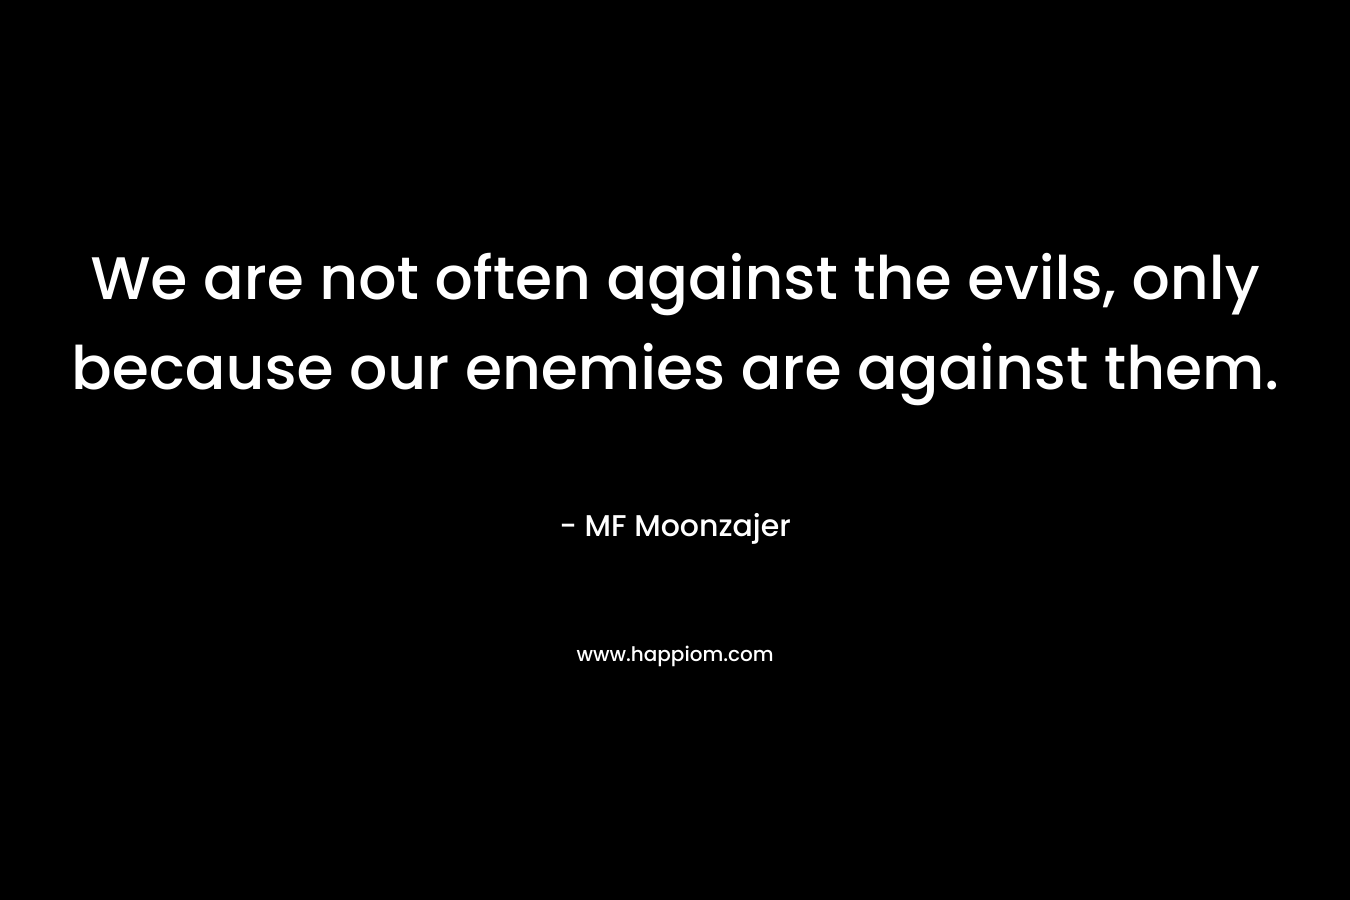 We are not often against the evils, only because our enemies are against them.